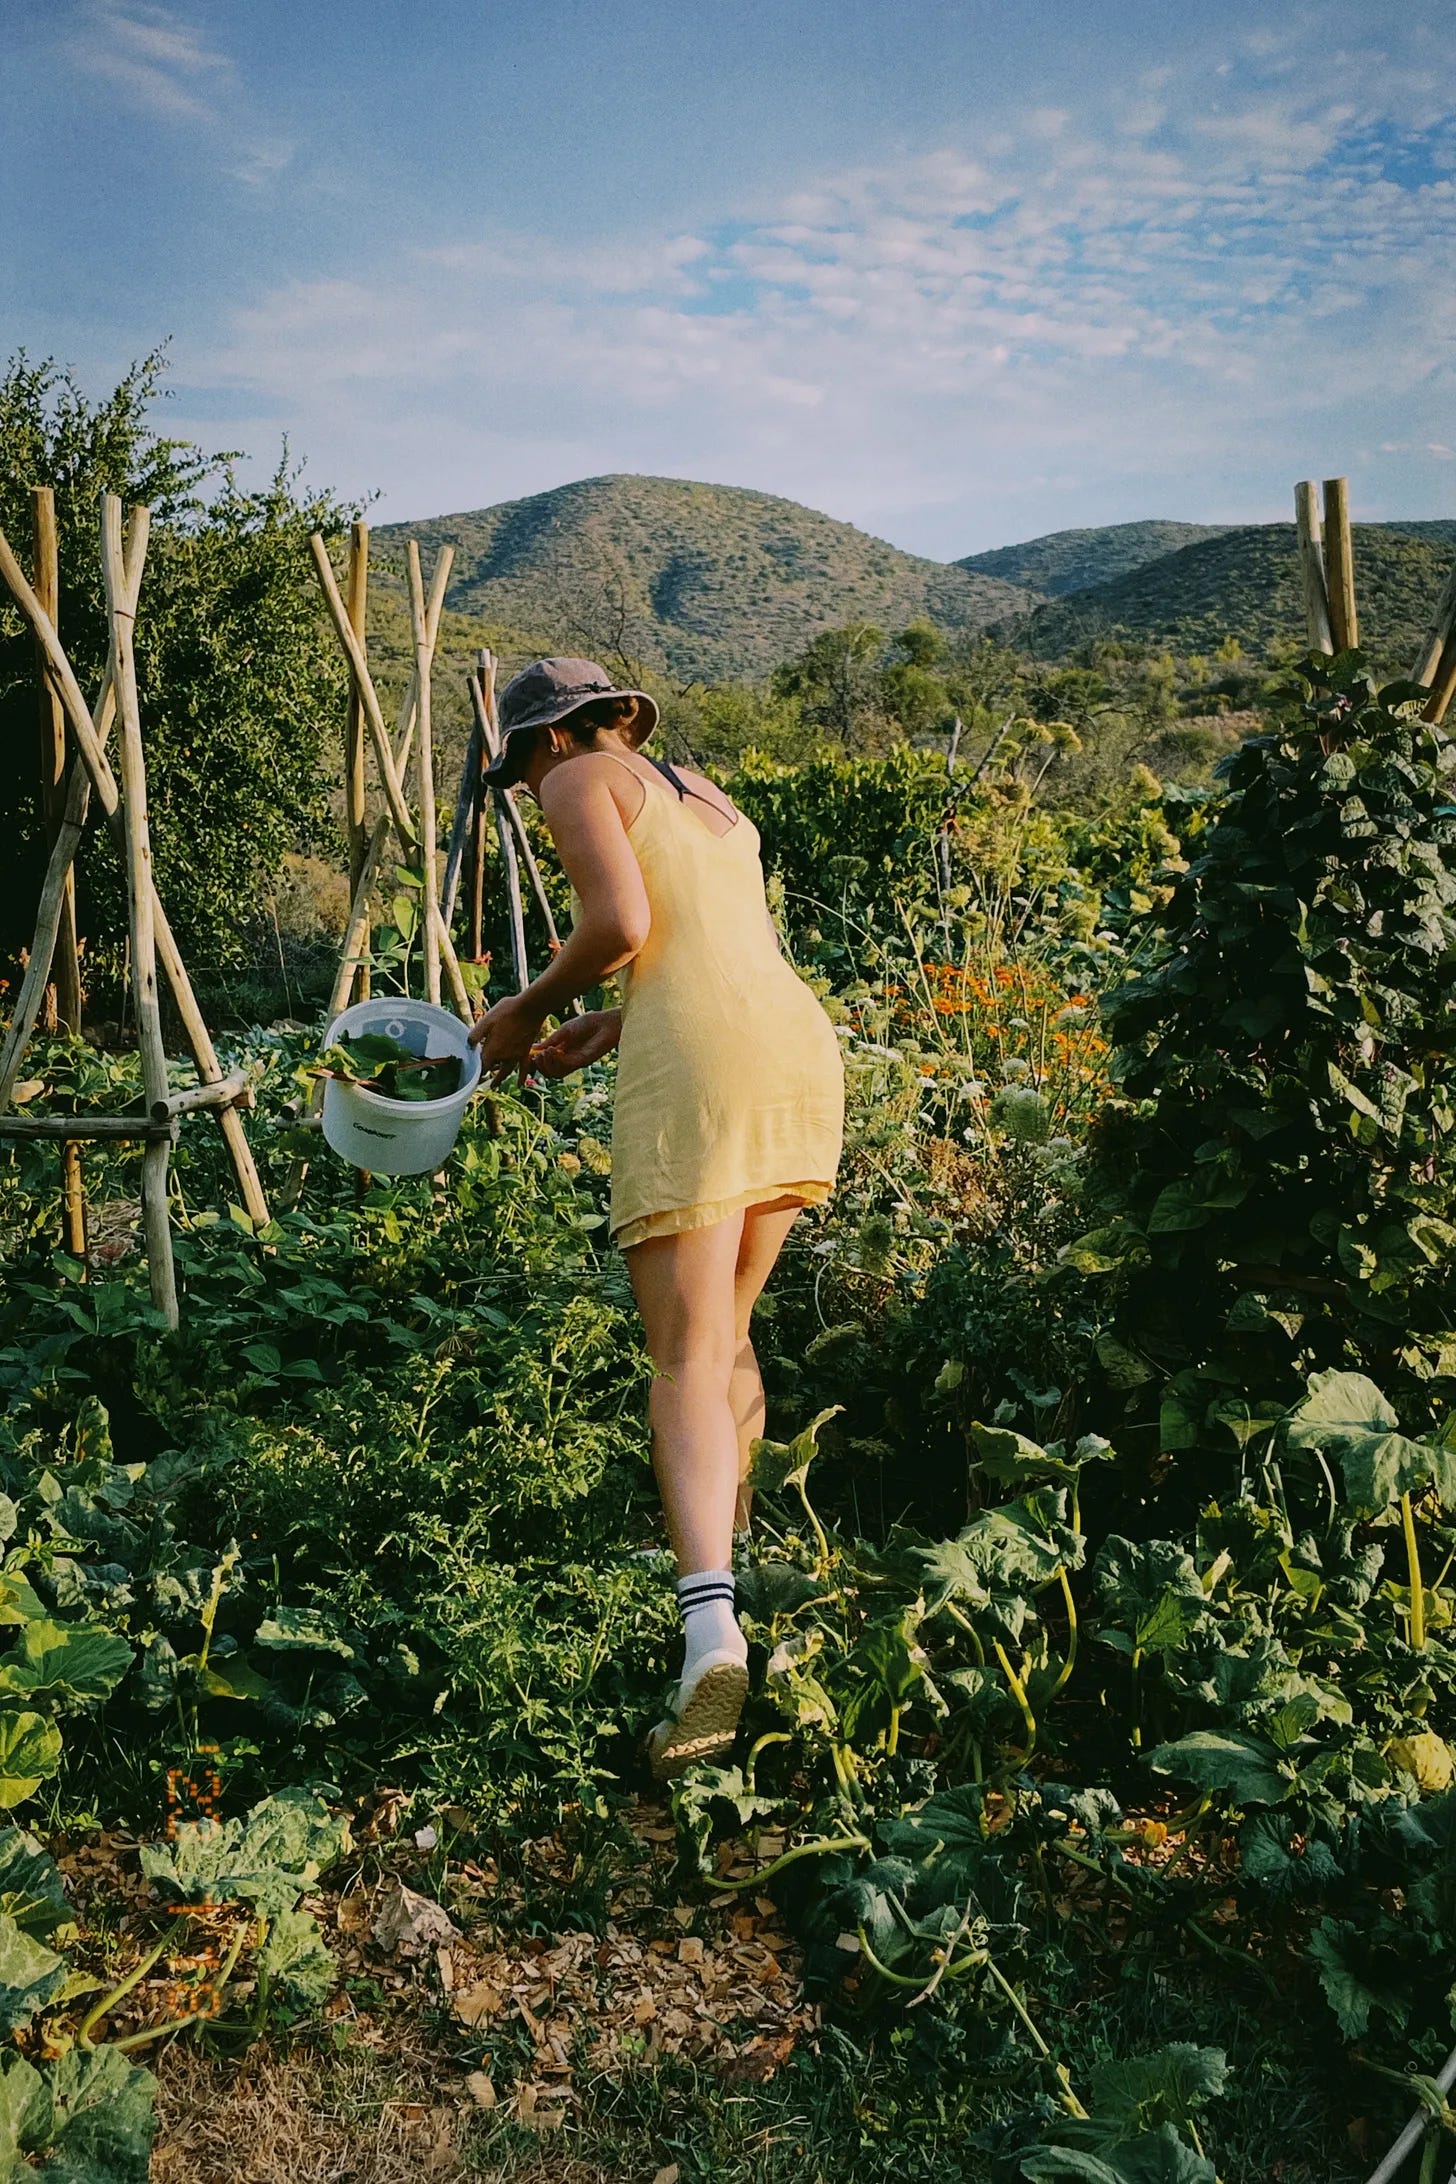 eva nowe works in the garden at numbi valley permaculture farm in south africa